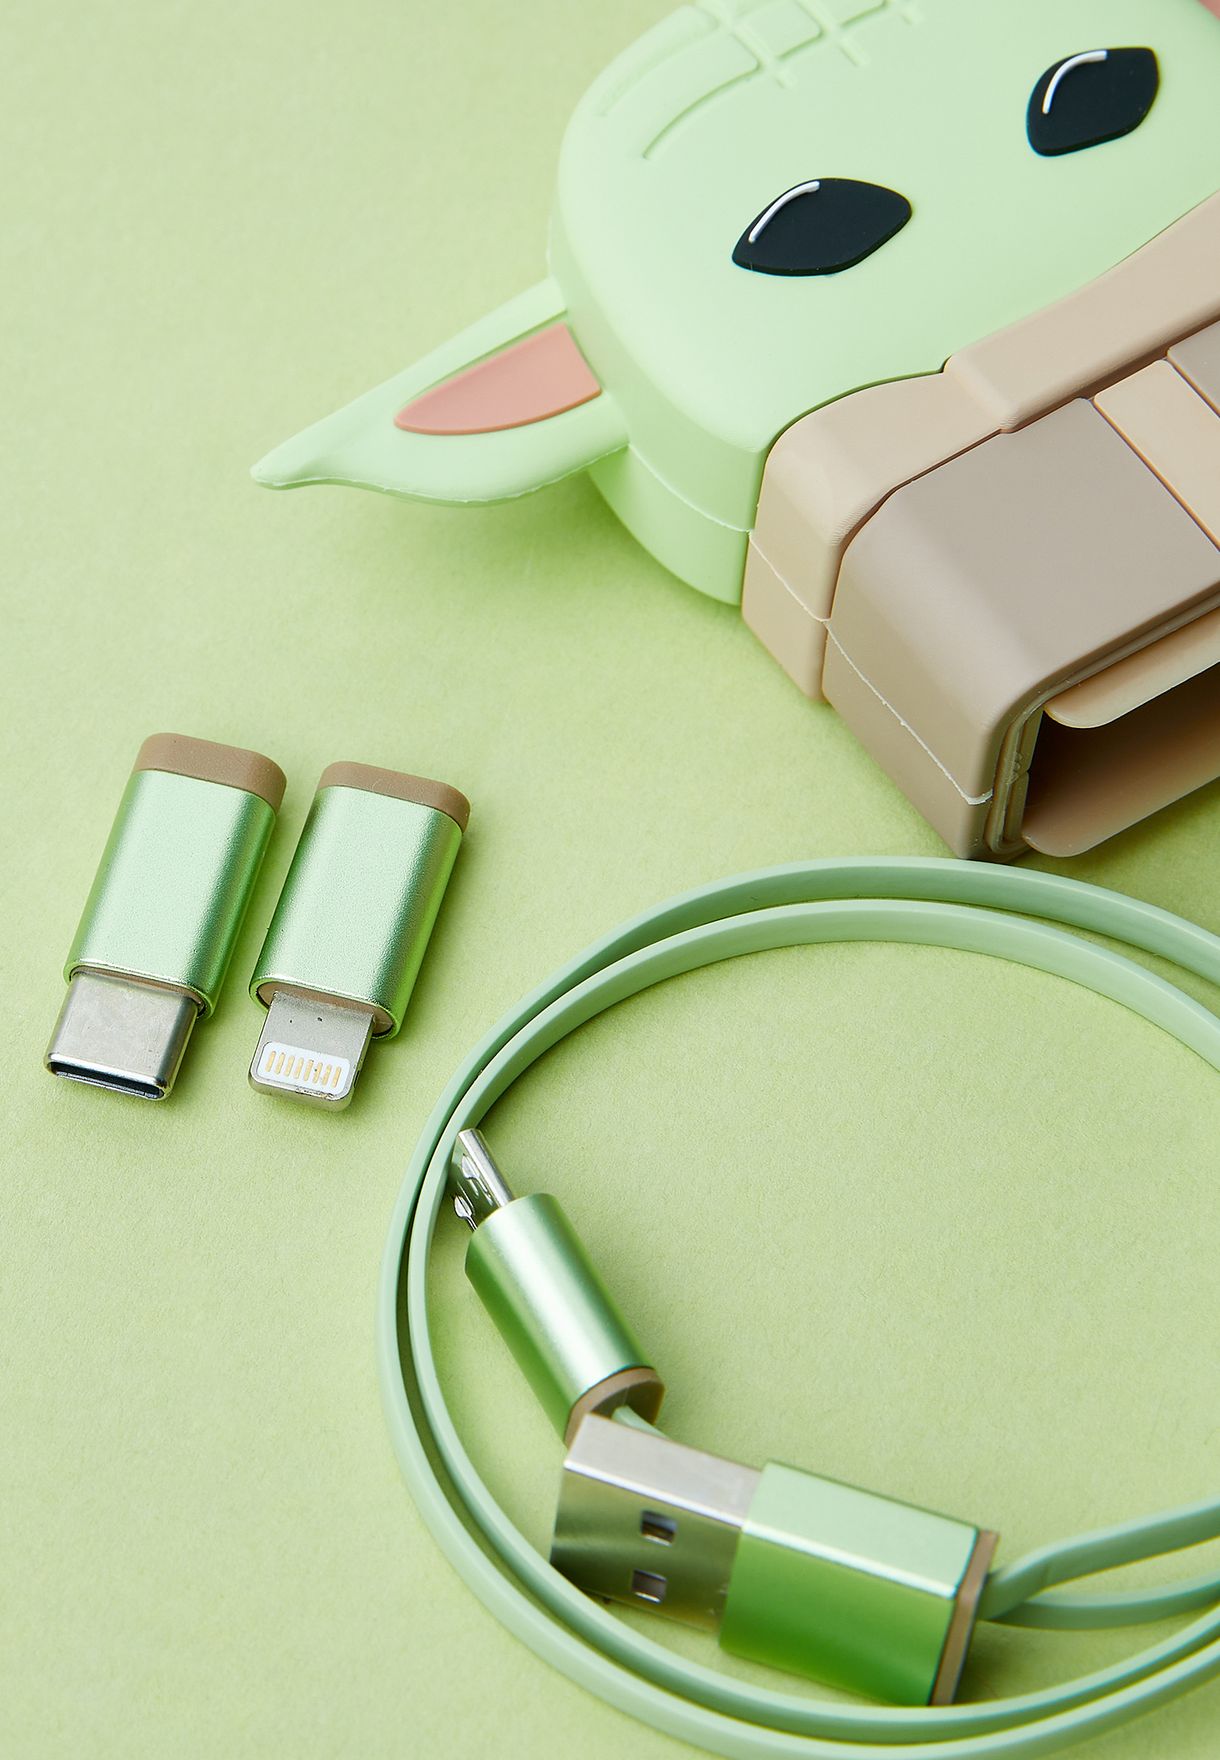 The Child Retractable Cable